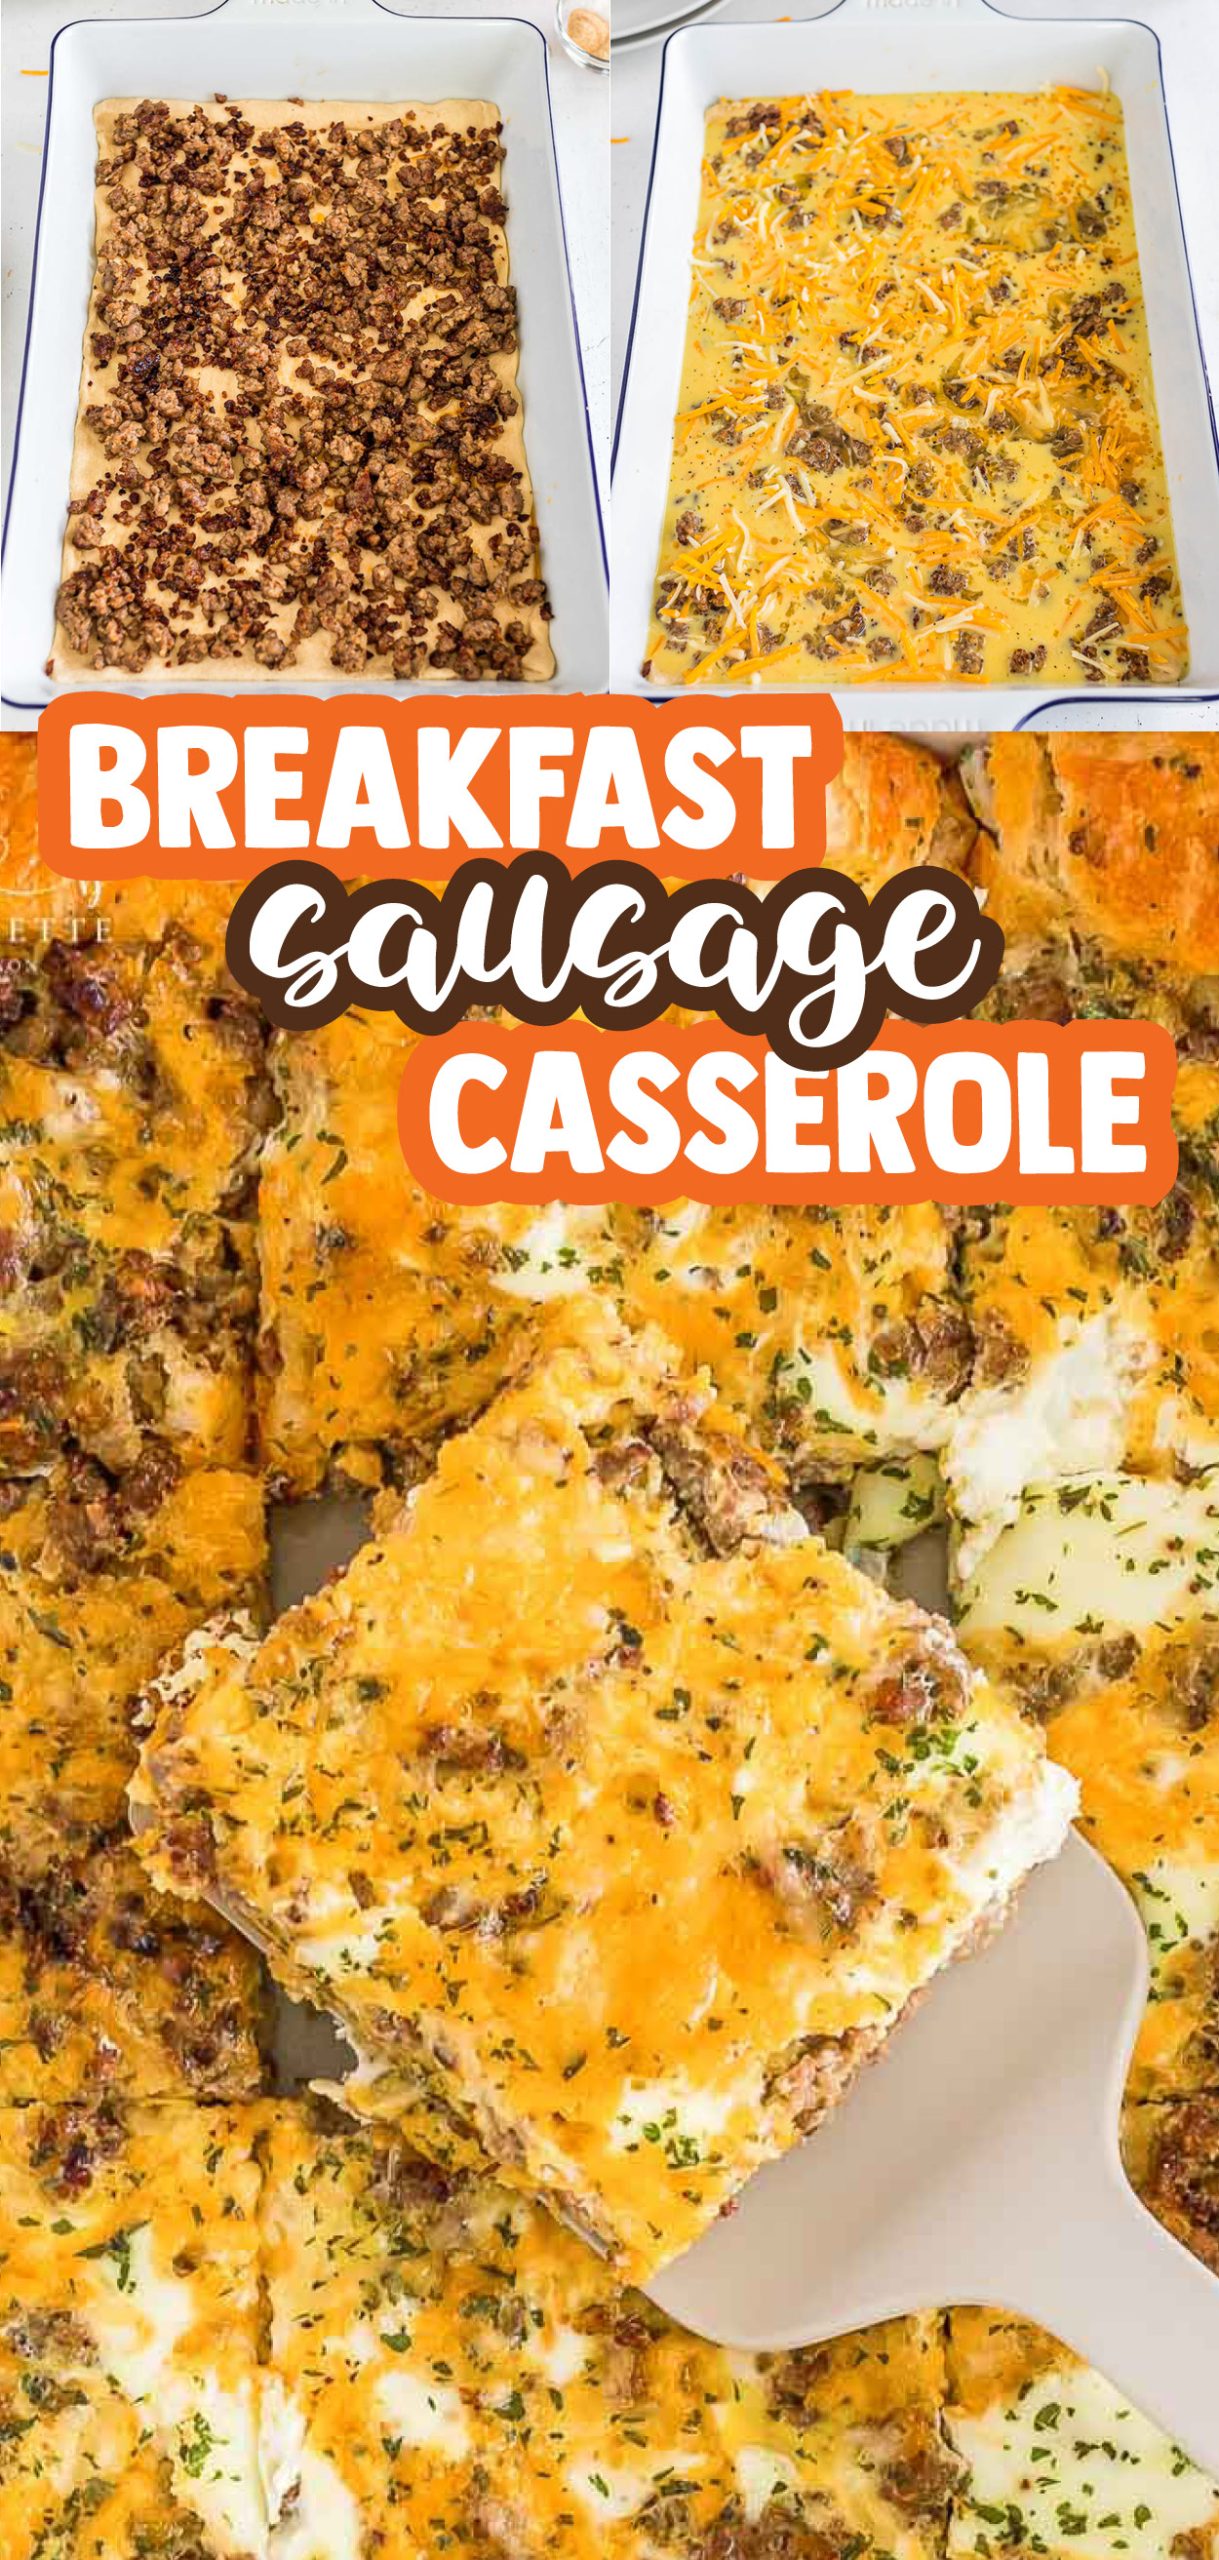 The best Breakfast Sausage Casserole with a layer of cheese, eggs, crescent dough, and sausage! A wonderful brunch or breakfast recipe.